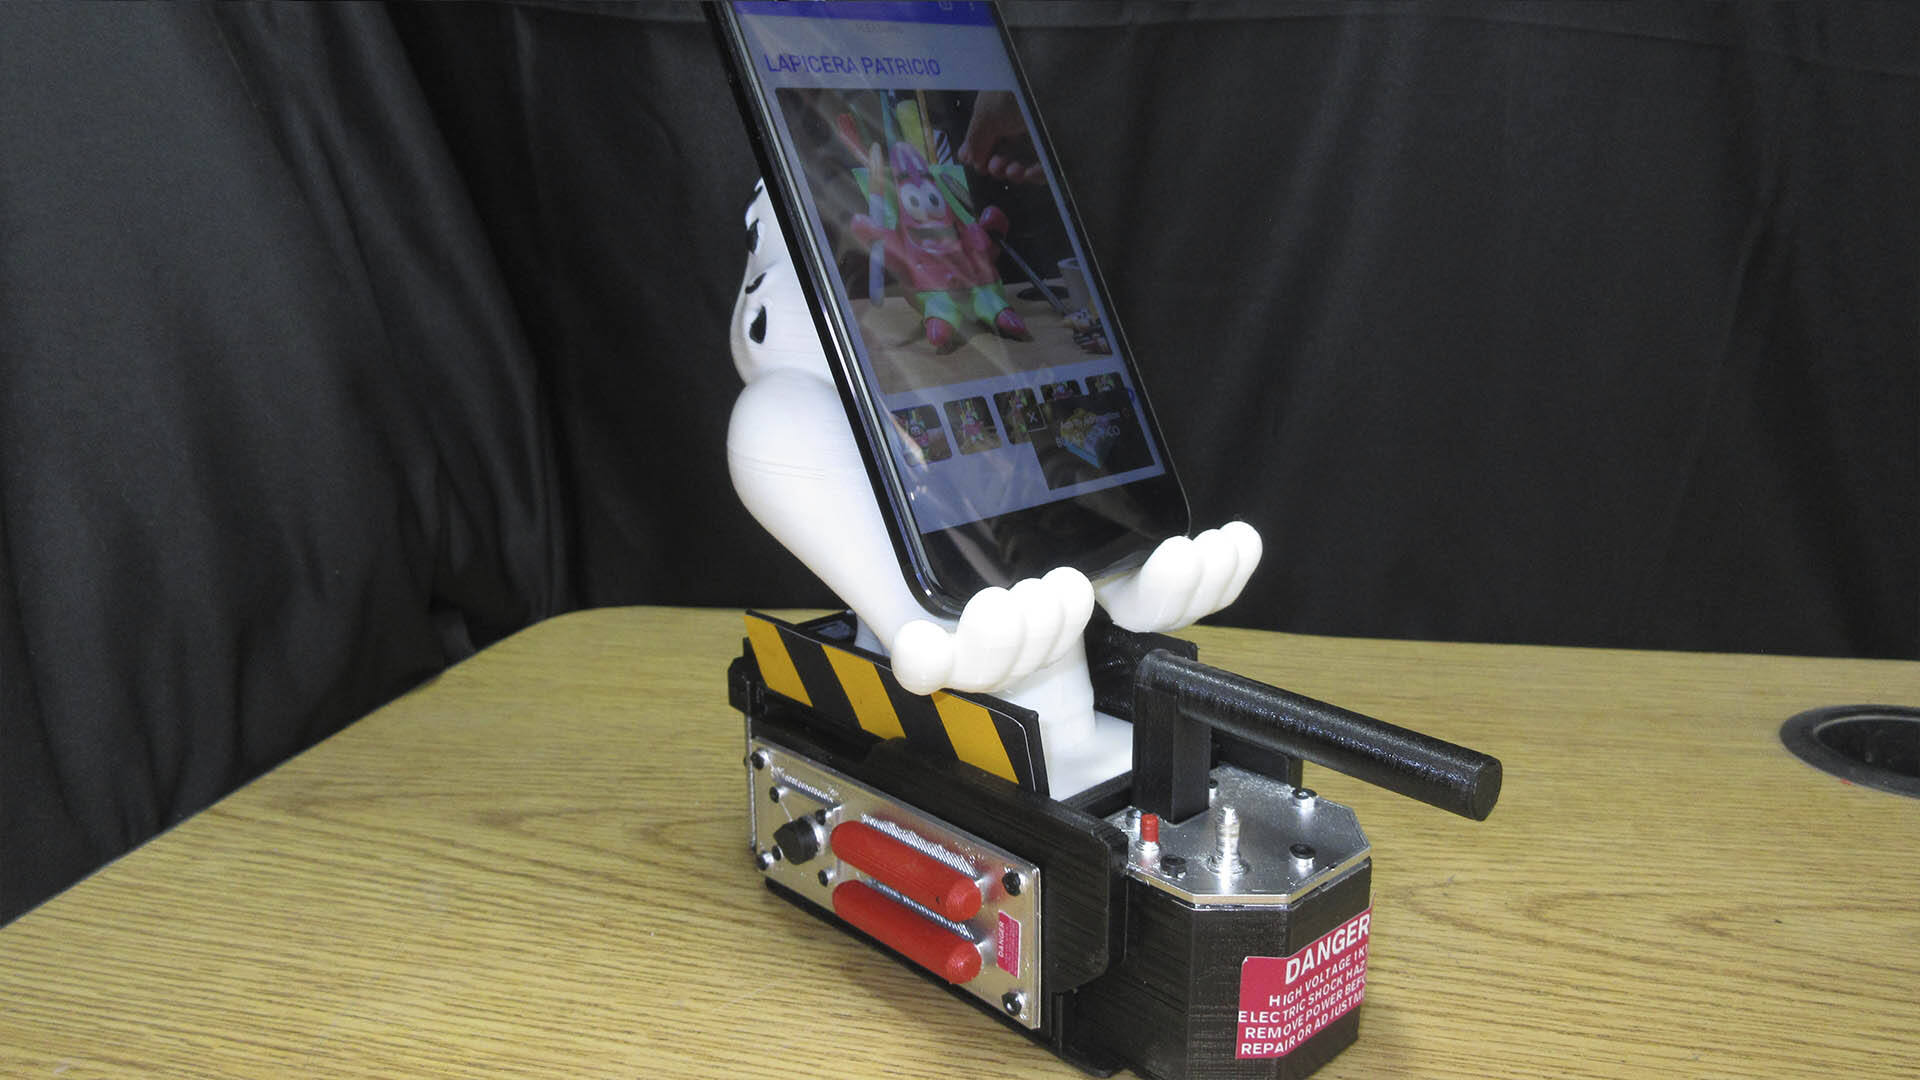 GHOSTBUSTERS FANART CELL PHONE TRAP